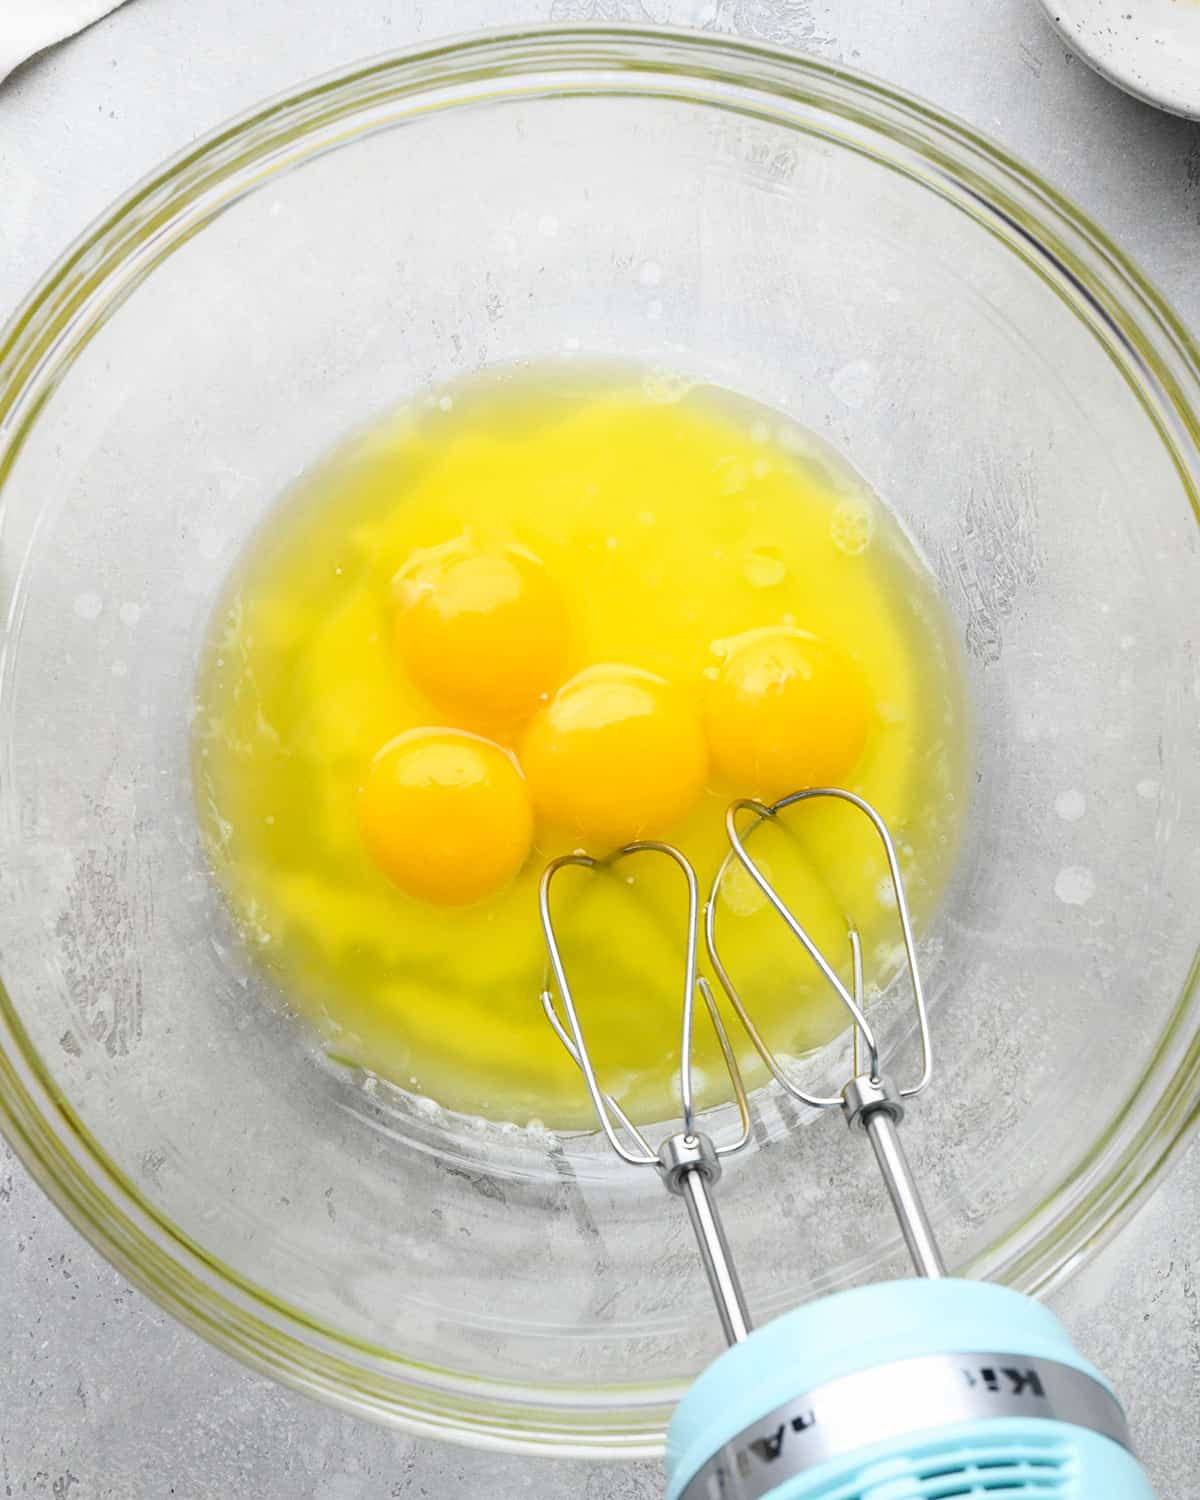 How to Make Waffles - egg yolks in a bowl before beating